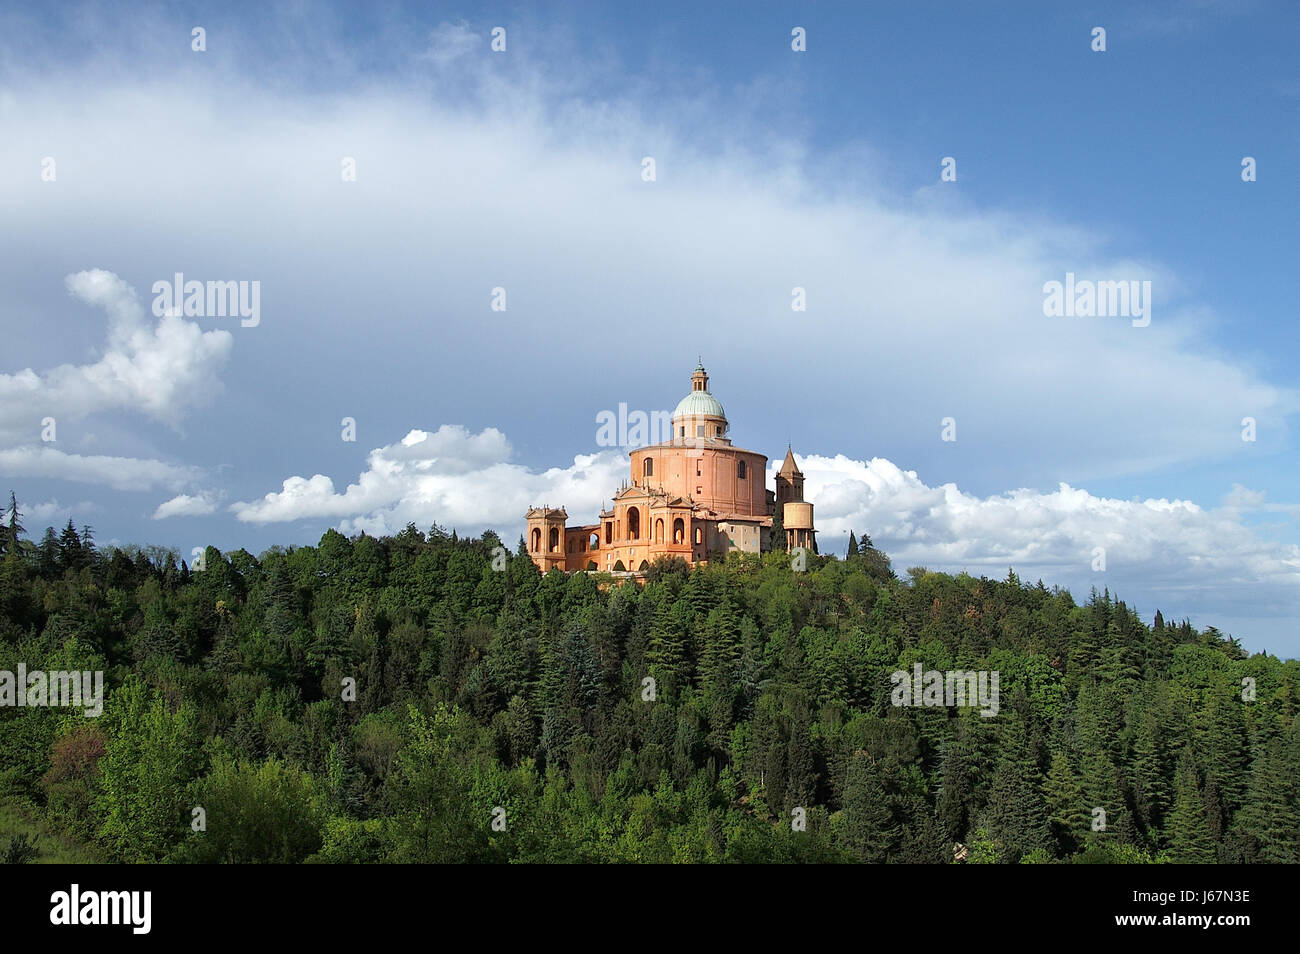 madonna italy church hill sights sightseeing monastery churches madonna place Stock Photo